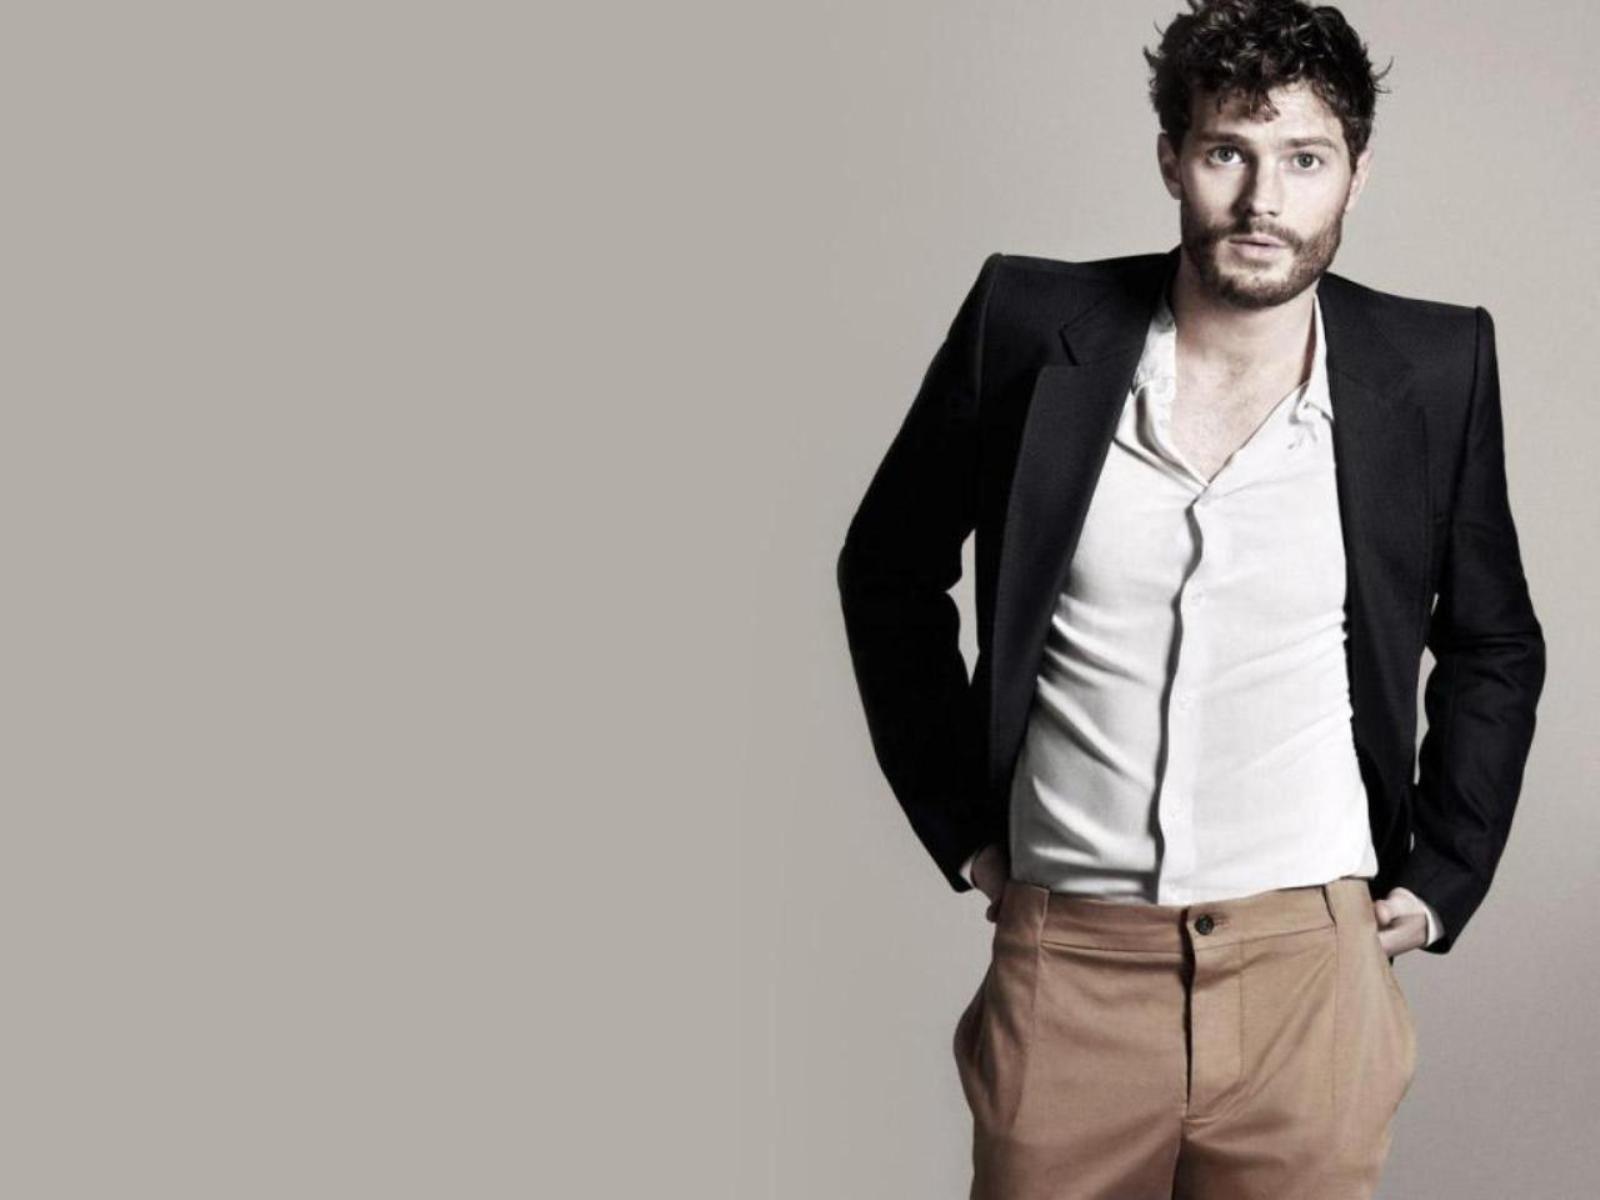 Jamie Dornan Wallpaper High Resolution and Quality Download